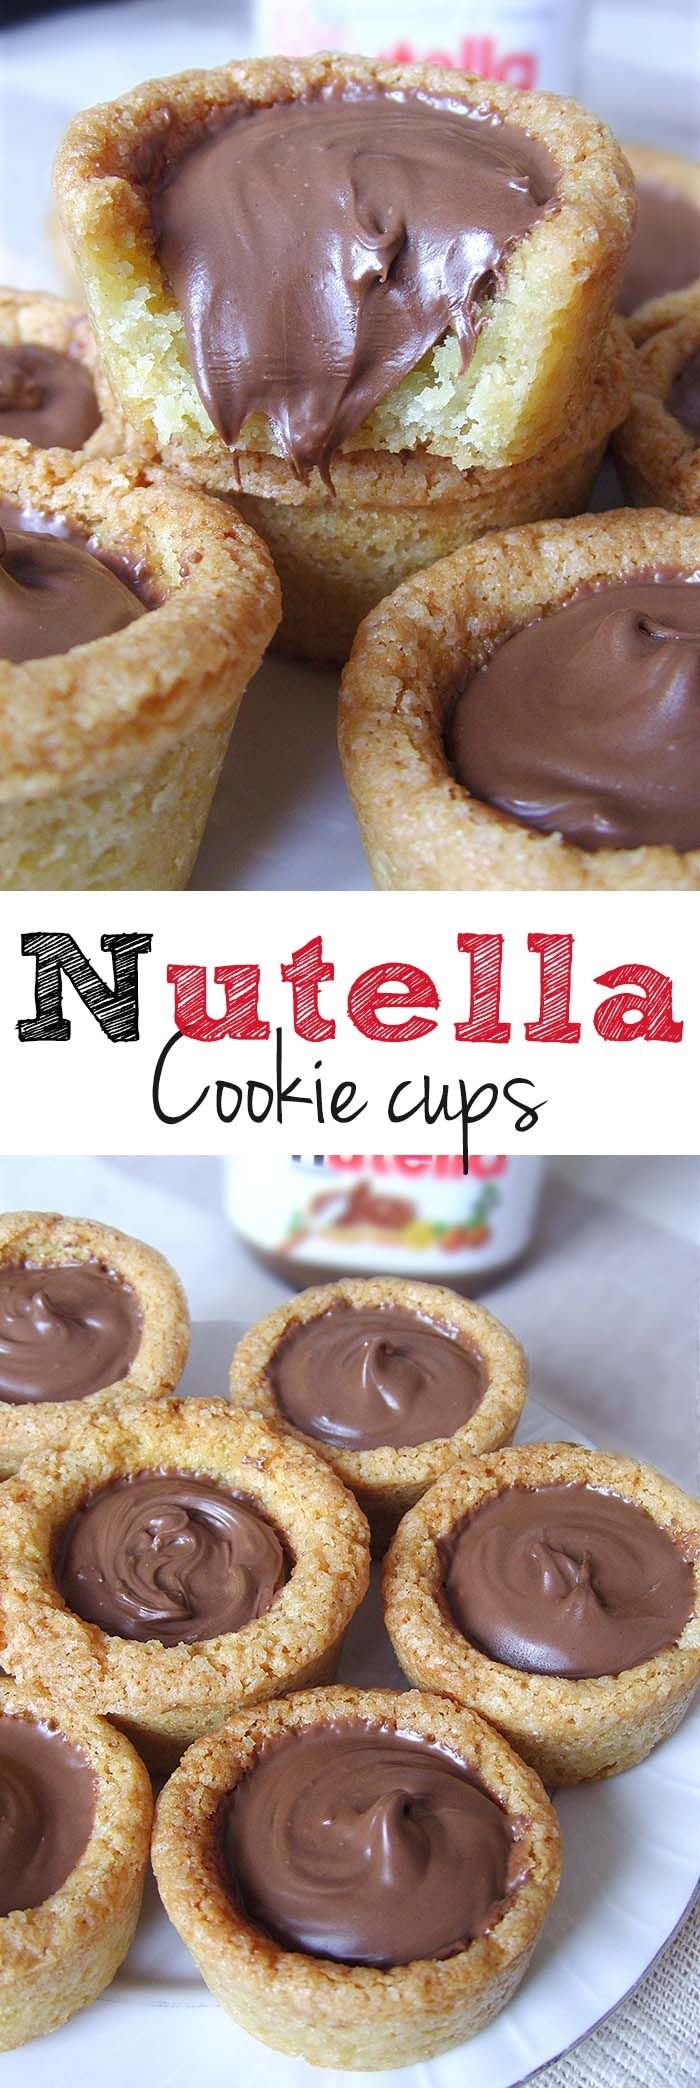 Nutella Cookie Cups - Cute, bite-sized and always...